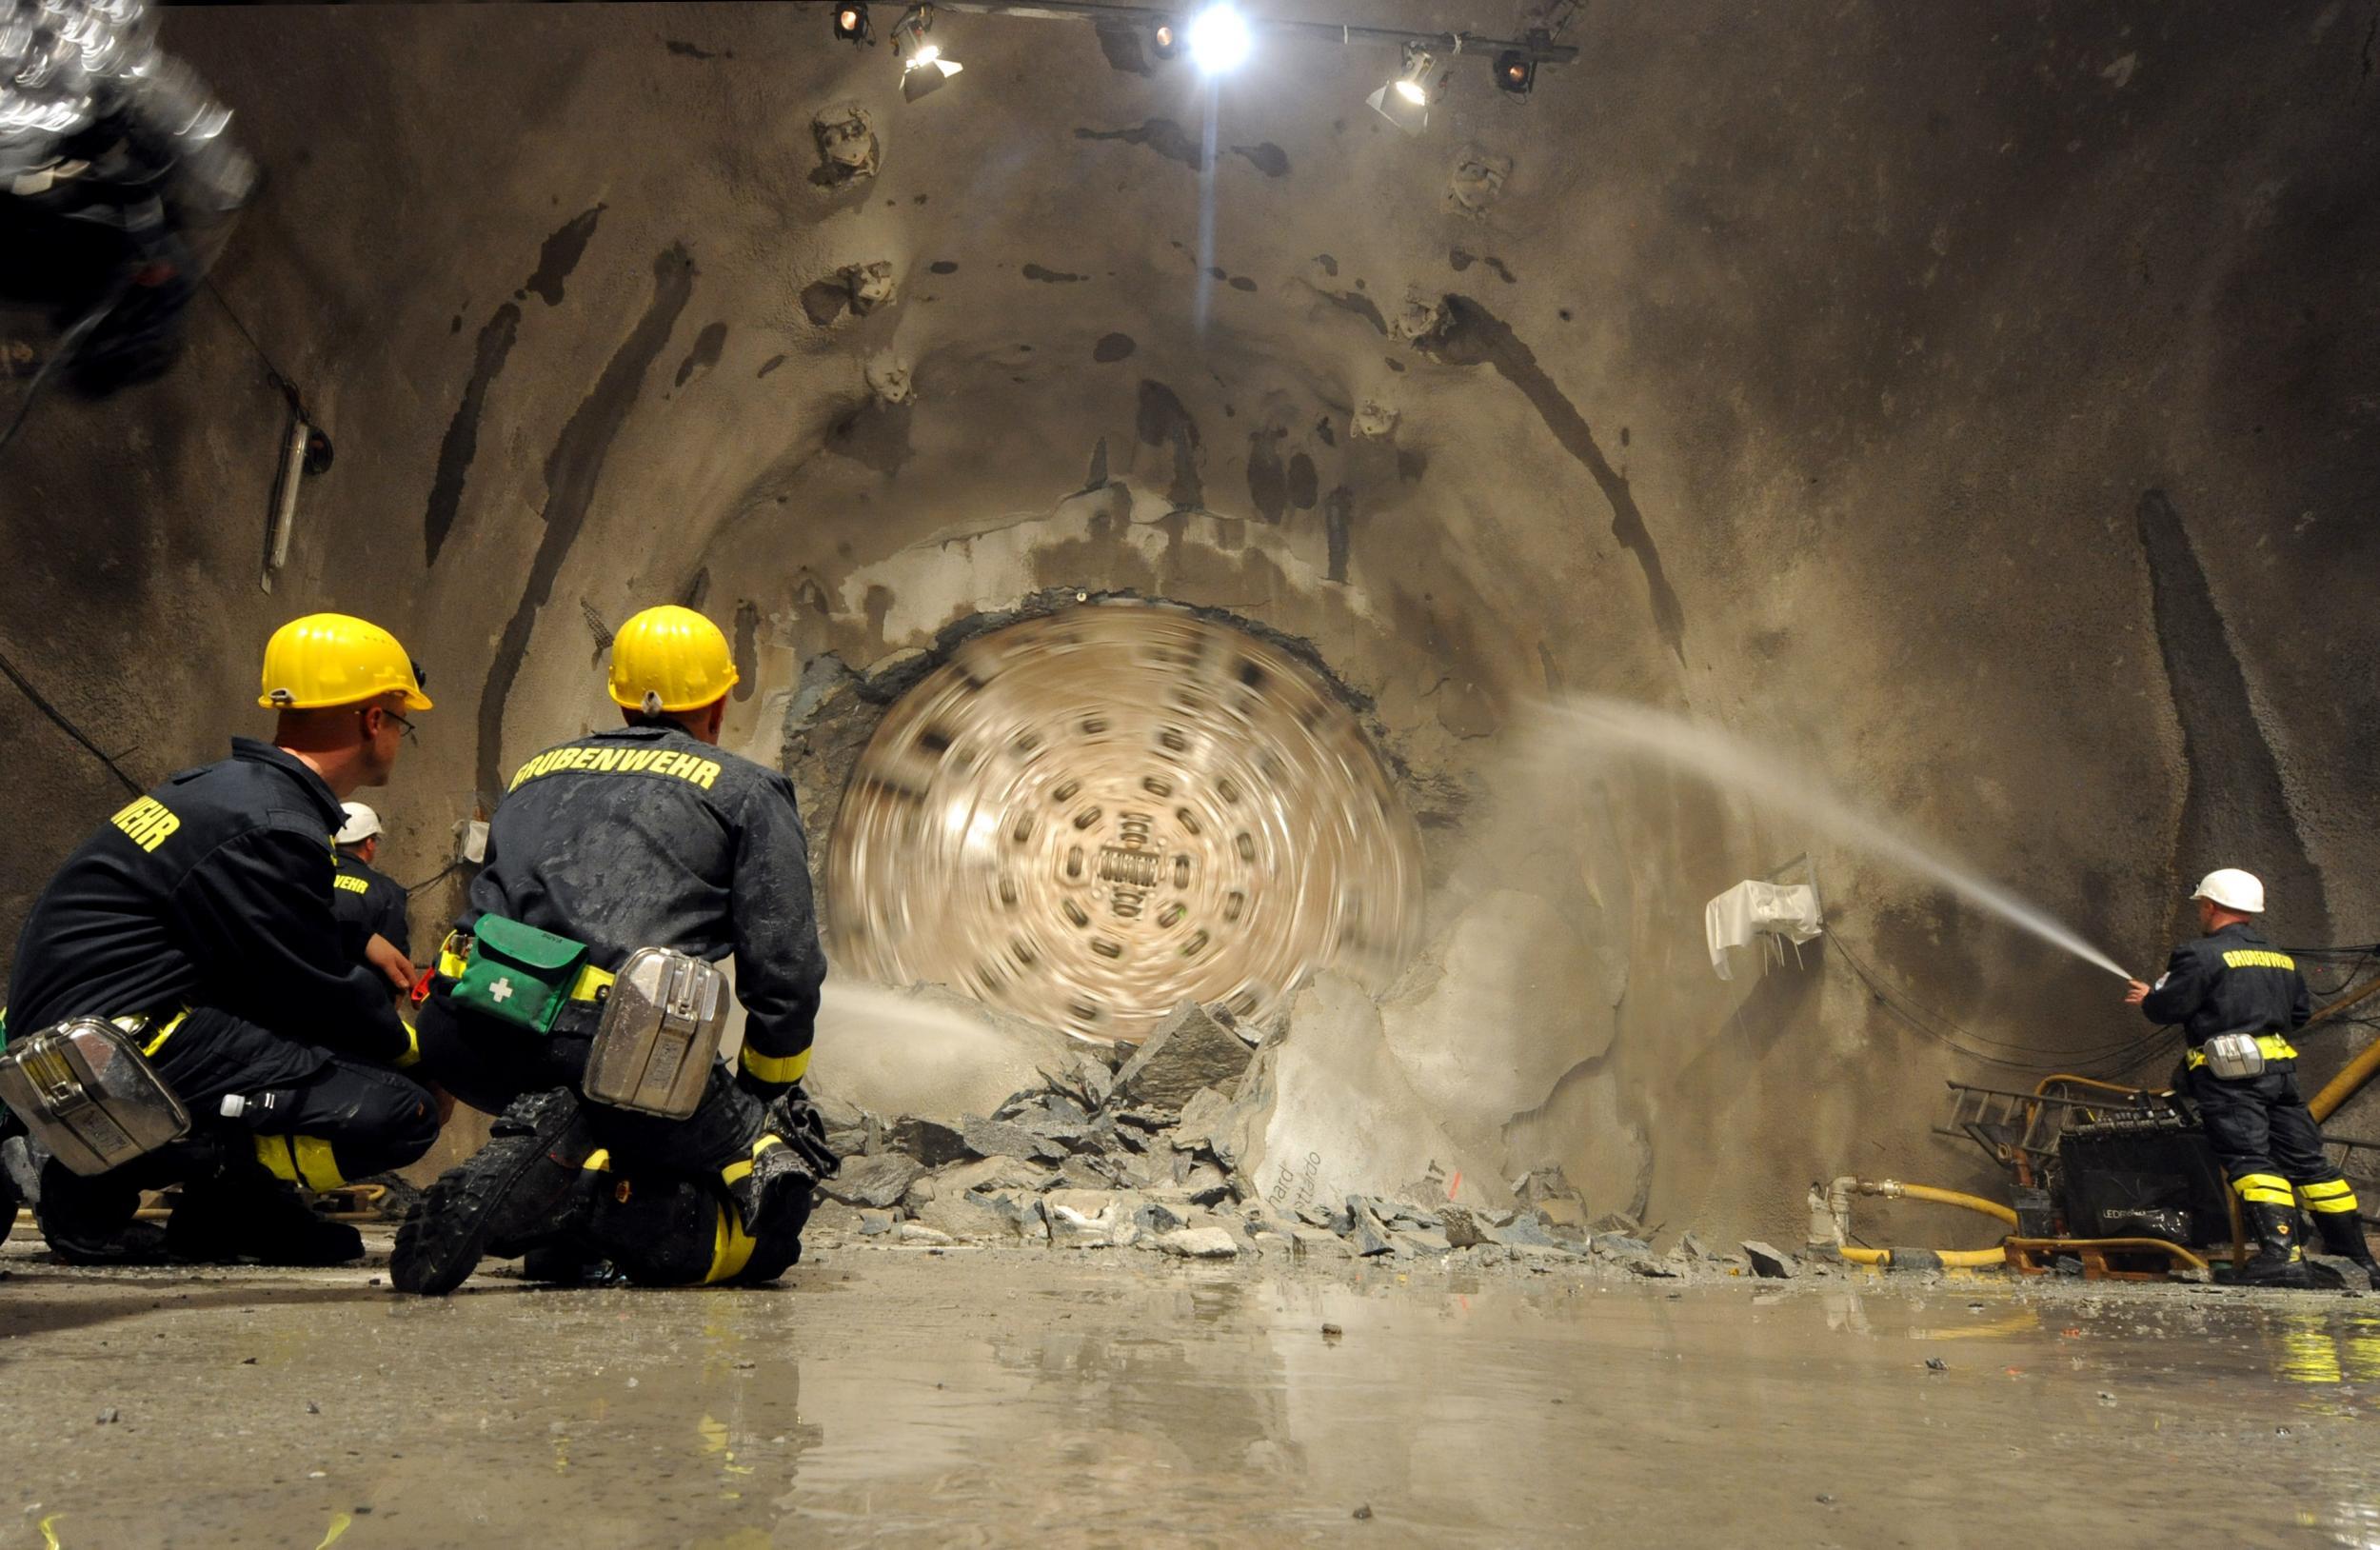 Work on the Gotthard Base Tunnel - the world's longest railway tunnel - has now been completed. It was under construction for 20 years